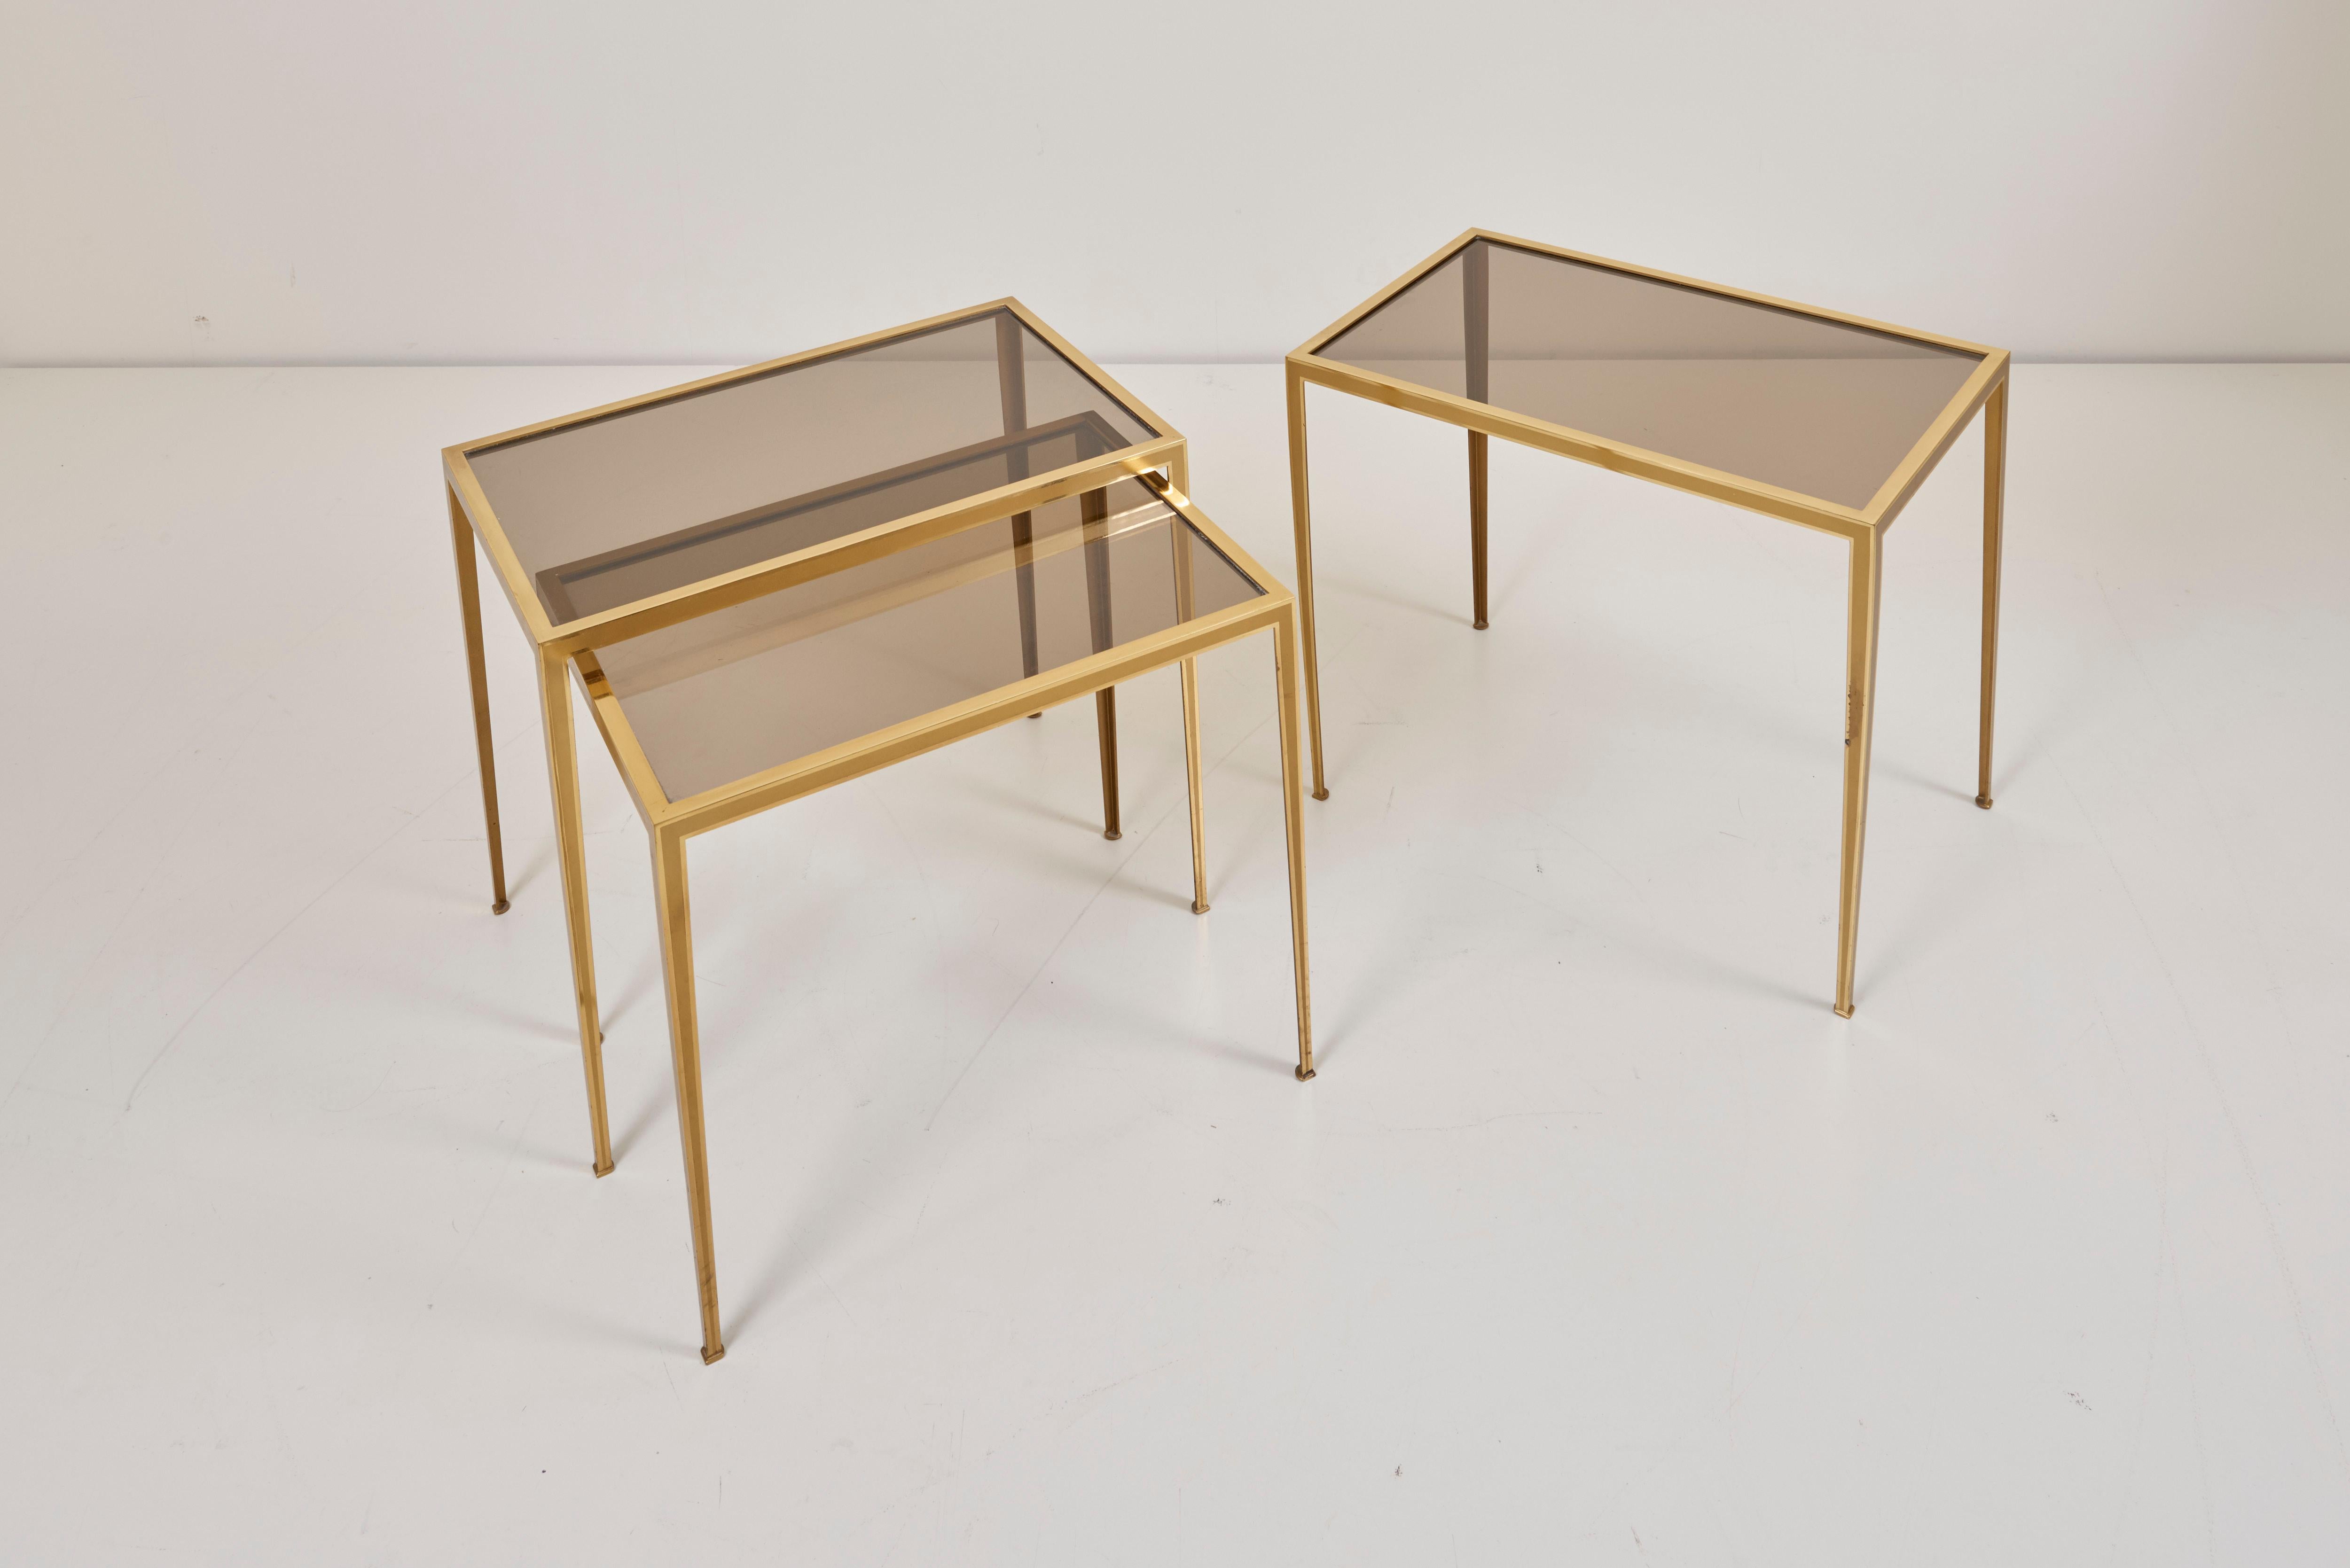 Wonderful set of three brass nesting tables with glass tops in very good vintage condition. The table legs in tapering shape providing elegance and lightness to the tables.

Measurements show the both bigger tables.
Measurements of the small